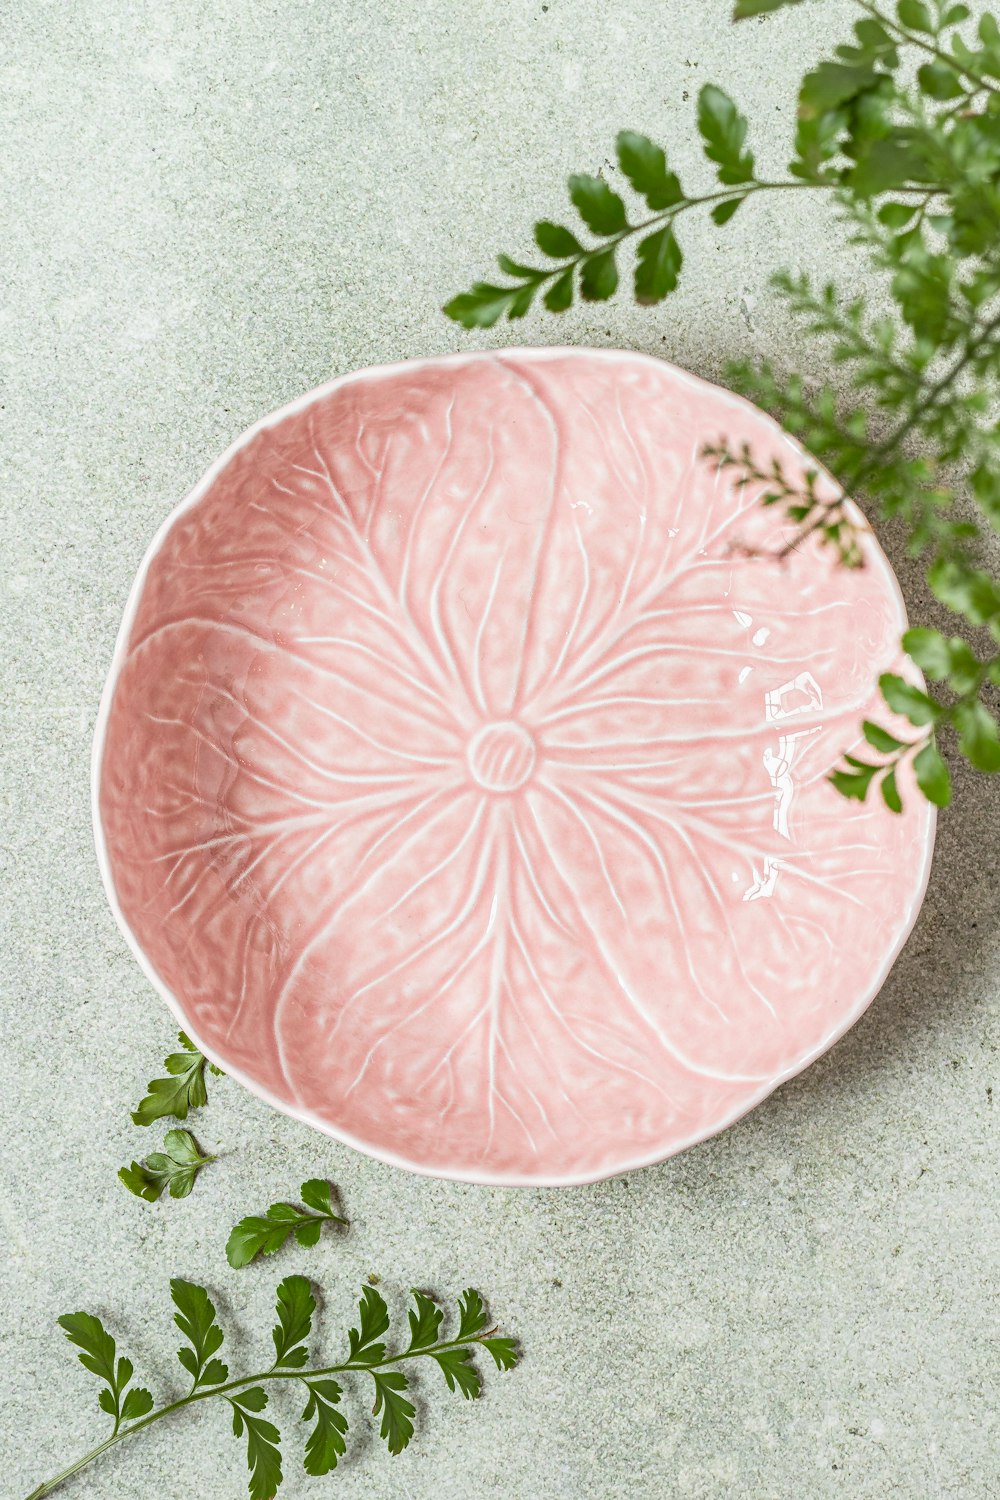 a pink plate sitting next to a green plant